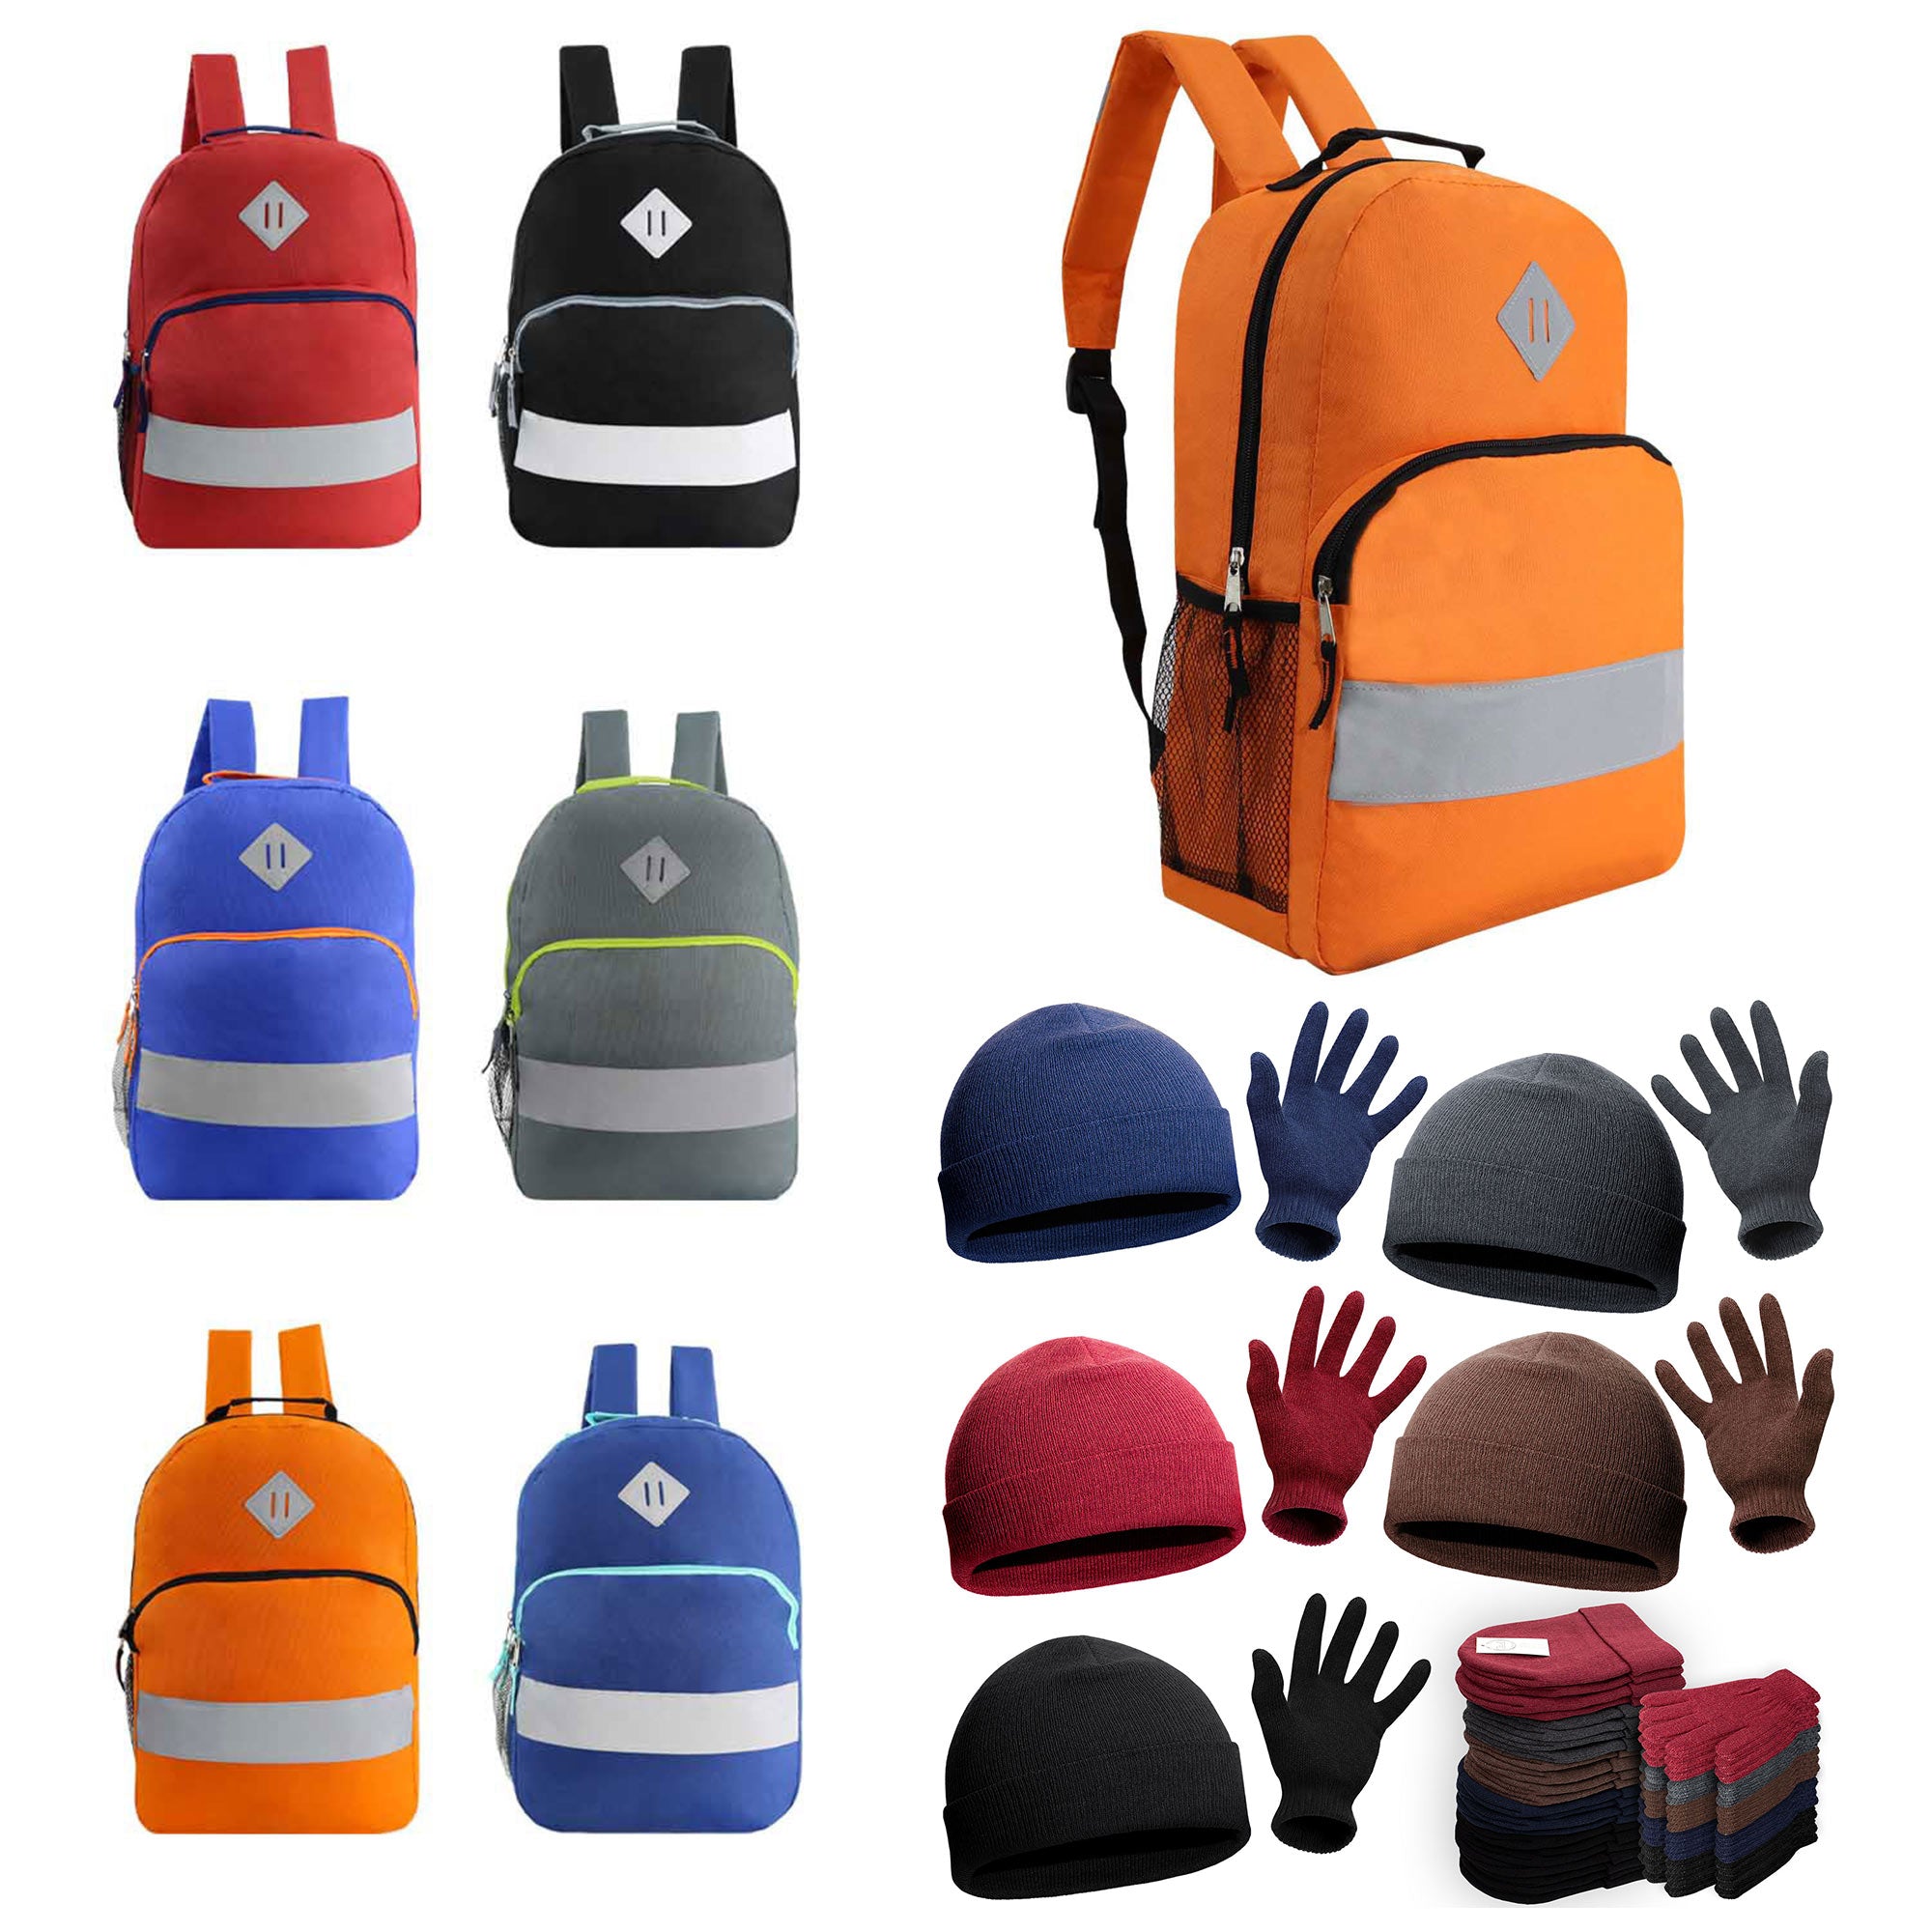 Bulk Case of 12 Reflective Backpacks and 12 Winter Item Sets | Wholesale Care Package - Emergencies, Homeless, Charity